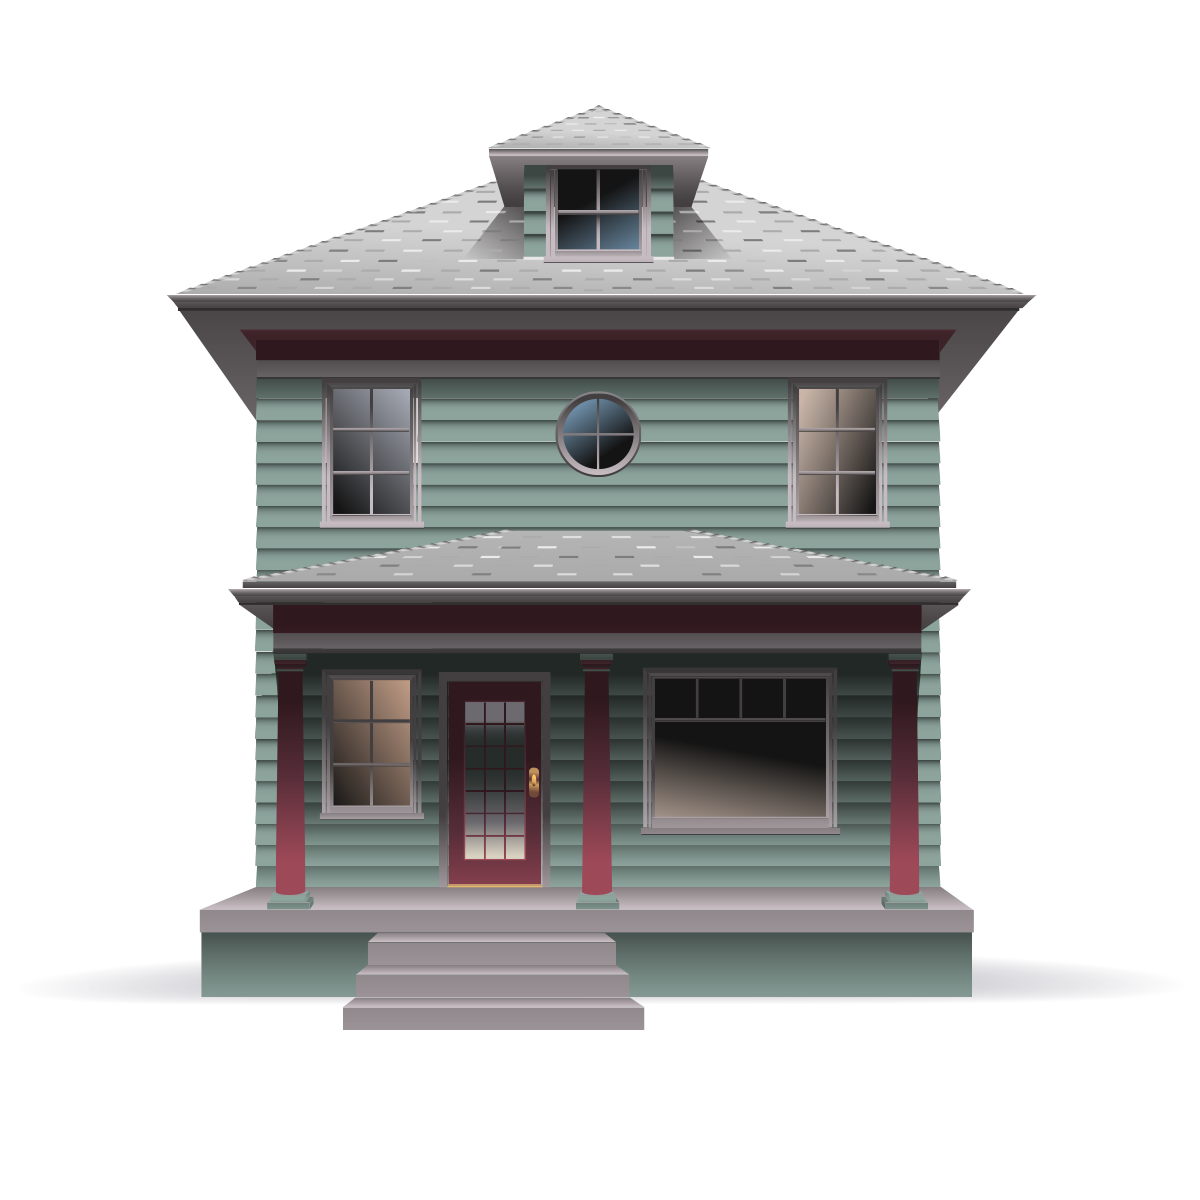 Green two story house with grey shingles and red beams illustration